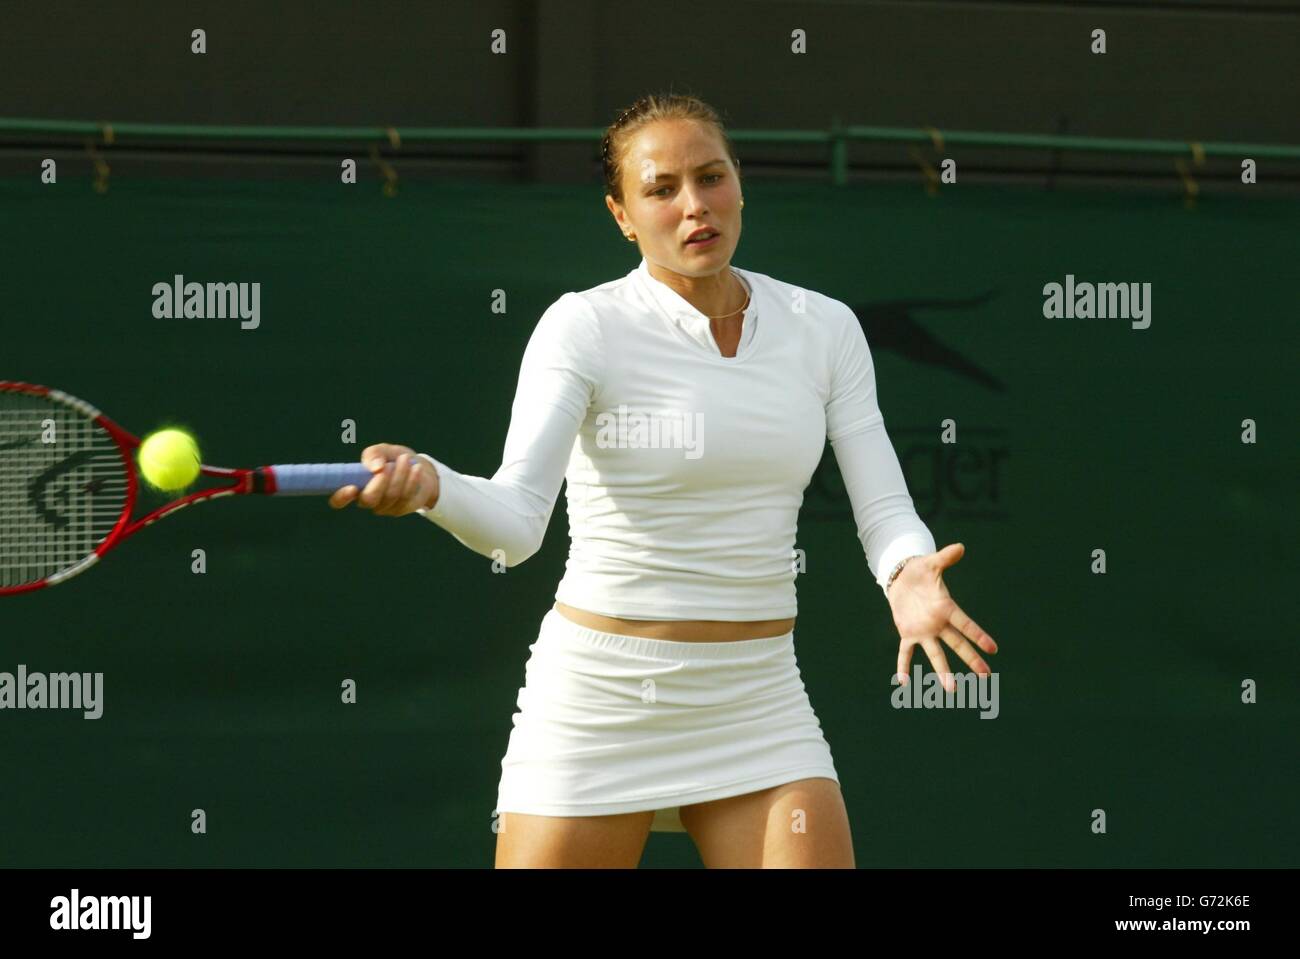 Severine Beltrame from France in action against Great Britain's Emily  Webley-Smith at The Lawn Tennis Championships in Wimbledon, London.  Webley-Smith won the match in straight sets 7:6/6:4. , NO MOBILE PHONE USE